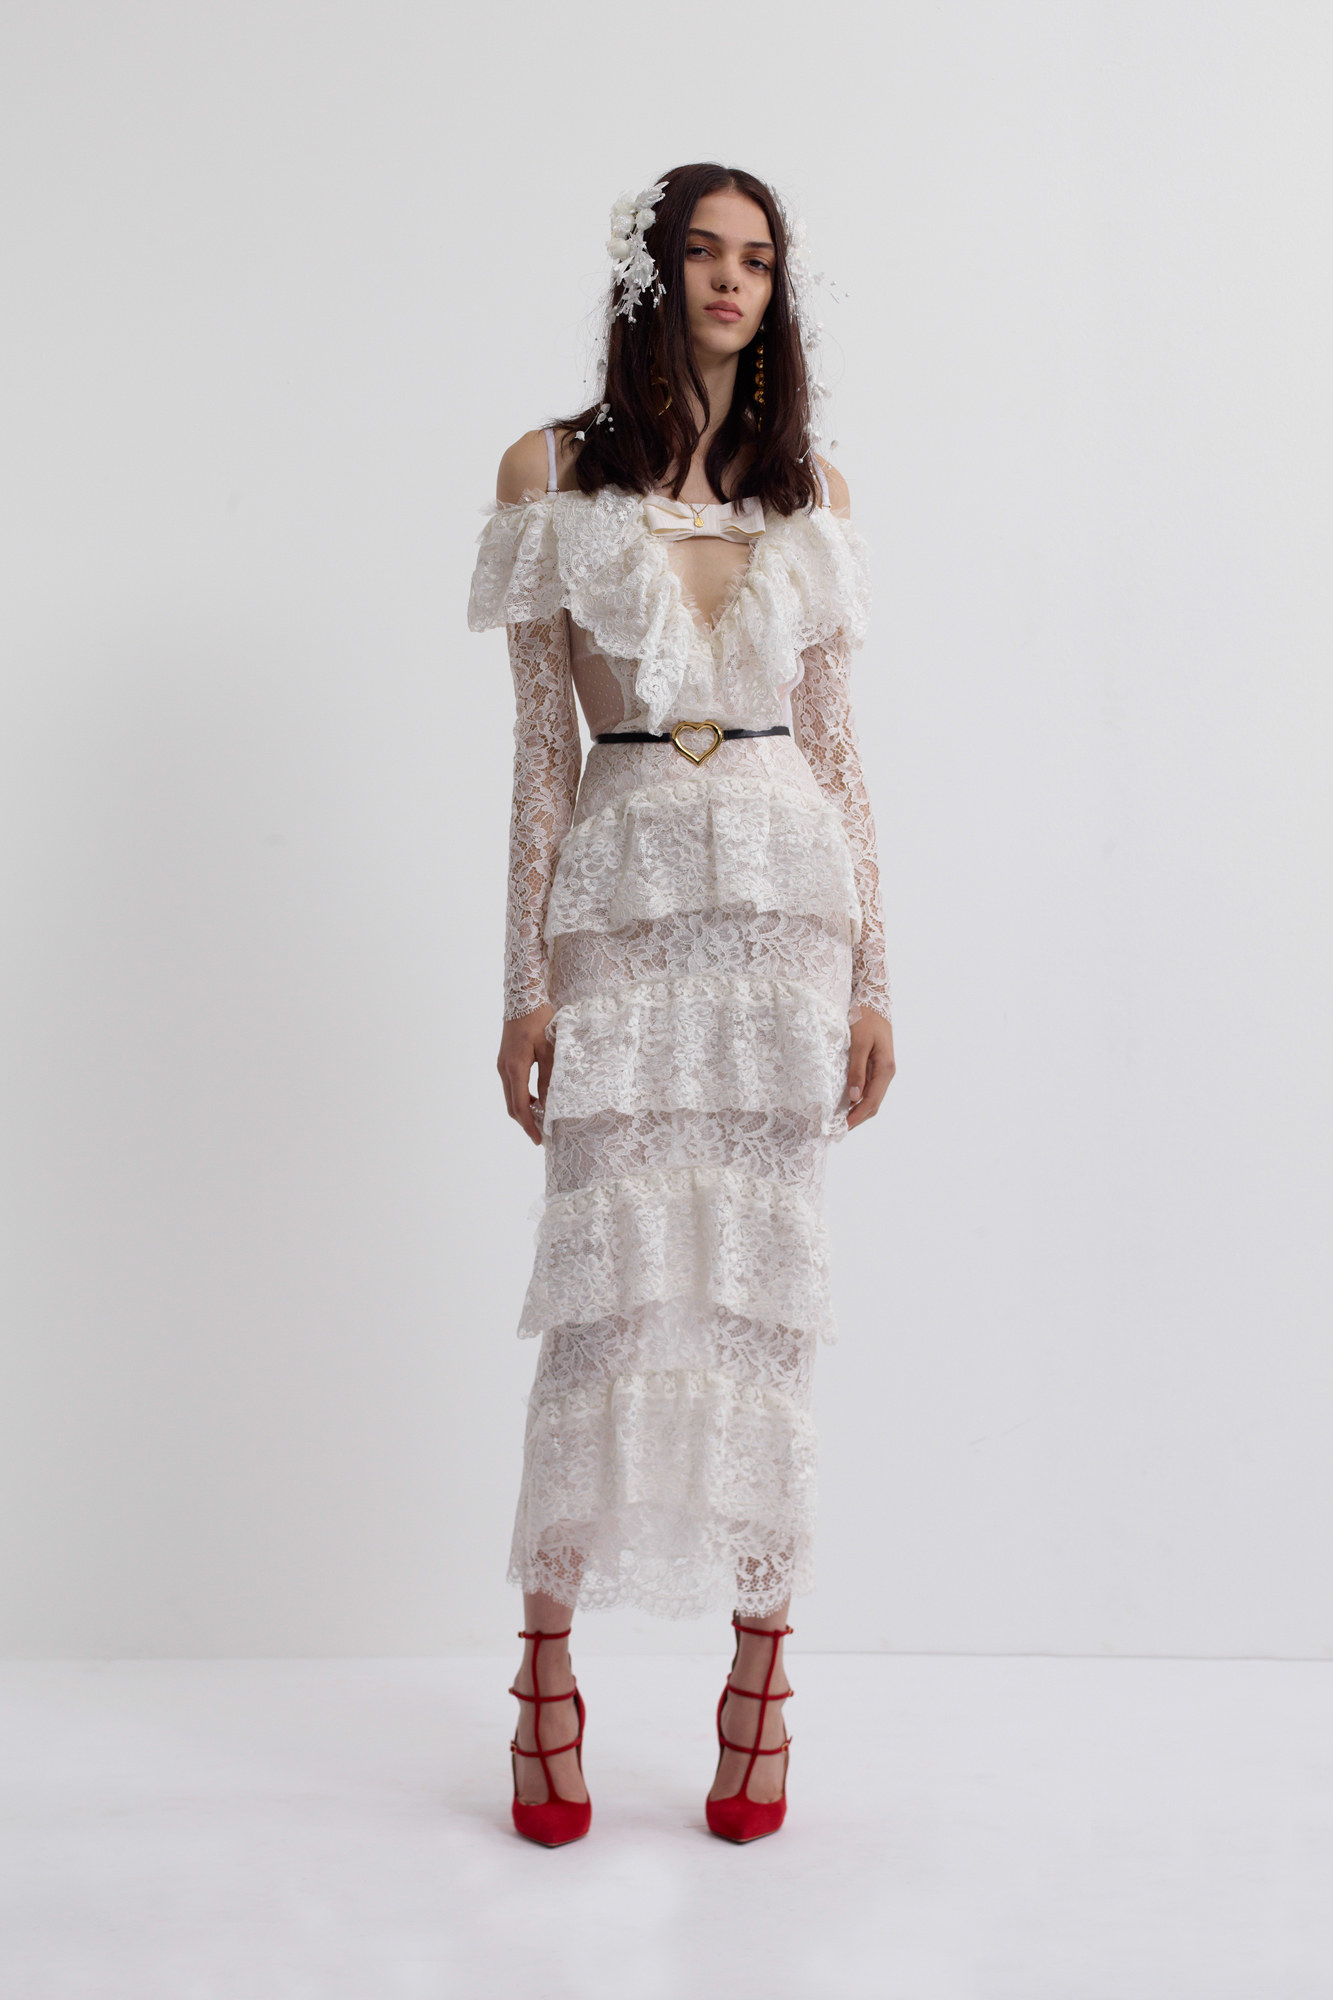 Frilly Lace Dresses